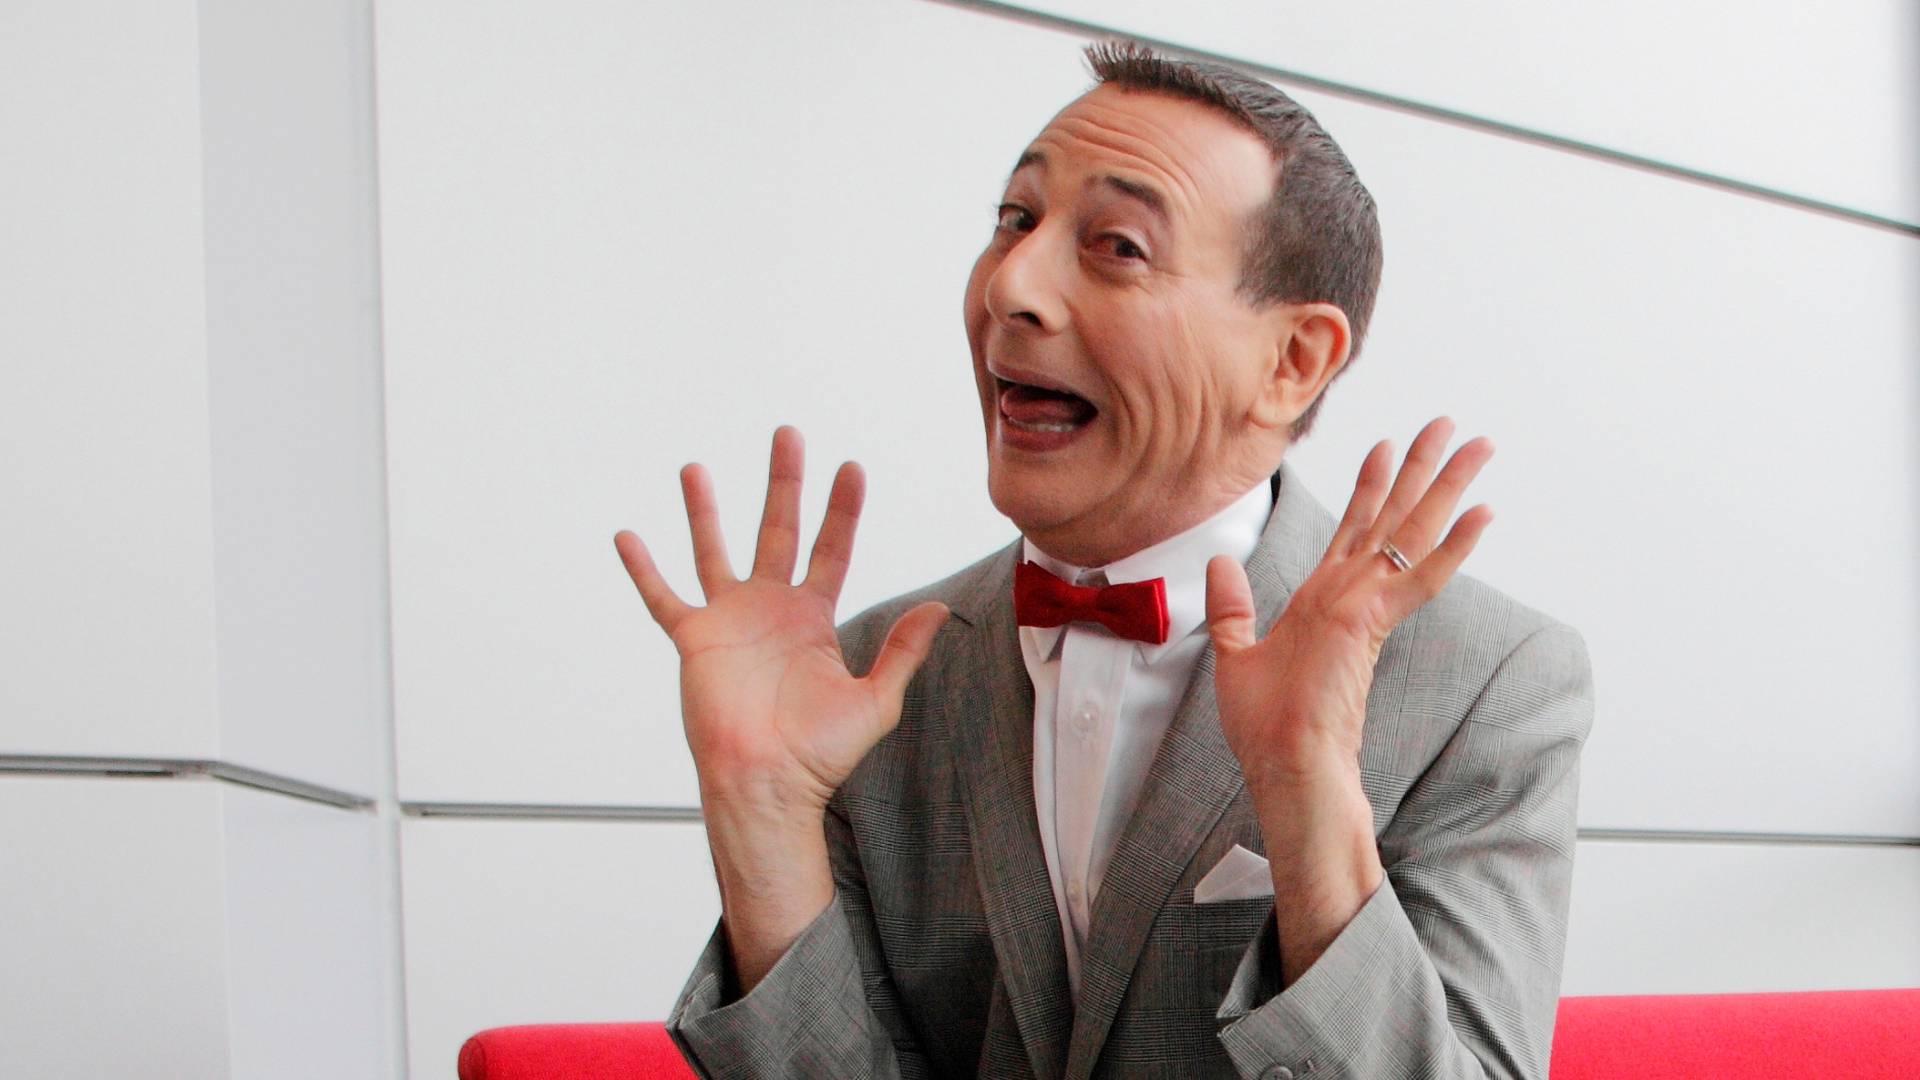 A man in a grey suit and red bowtie gestures wildly, mouth agape.